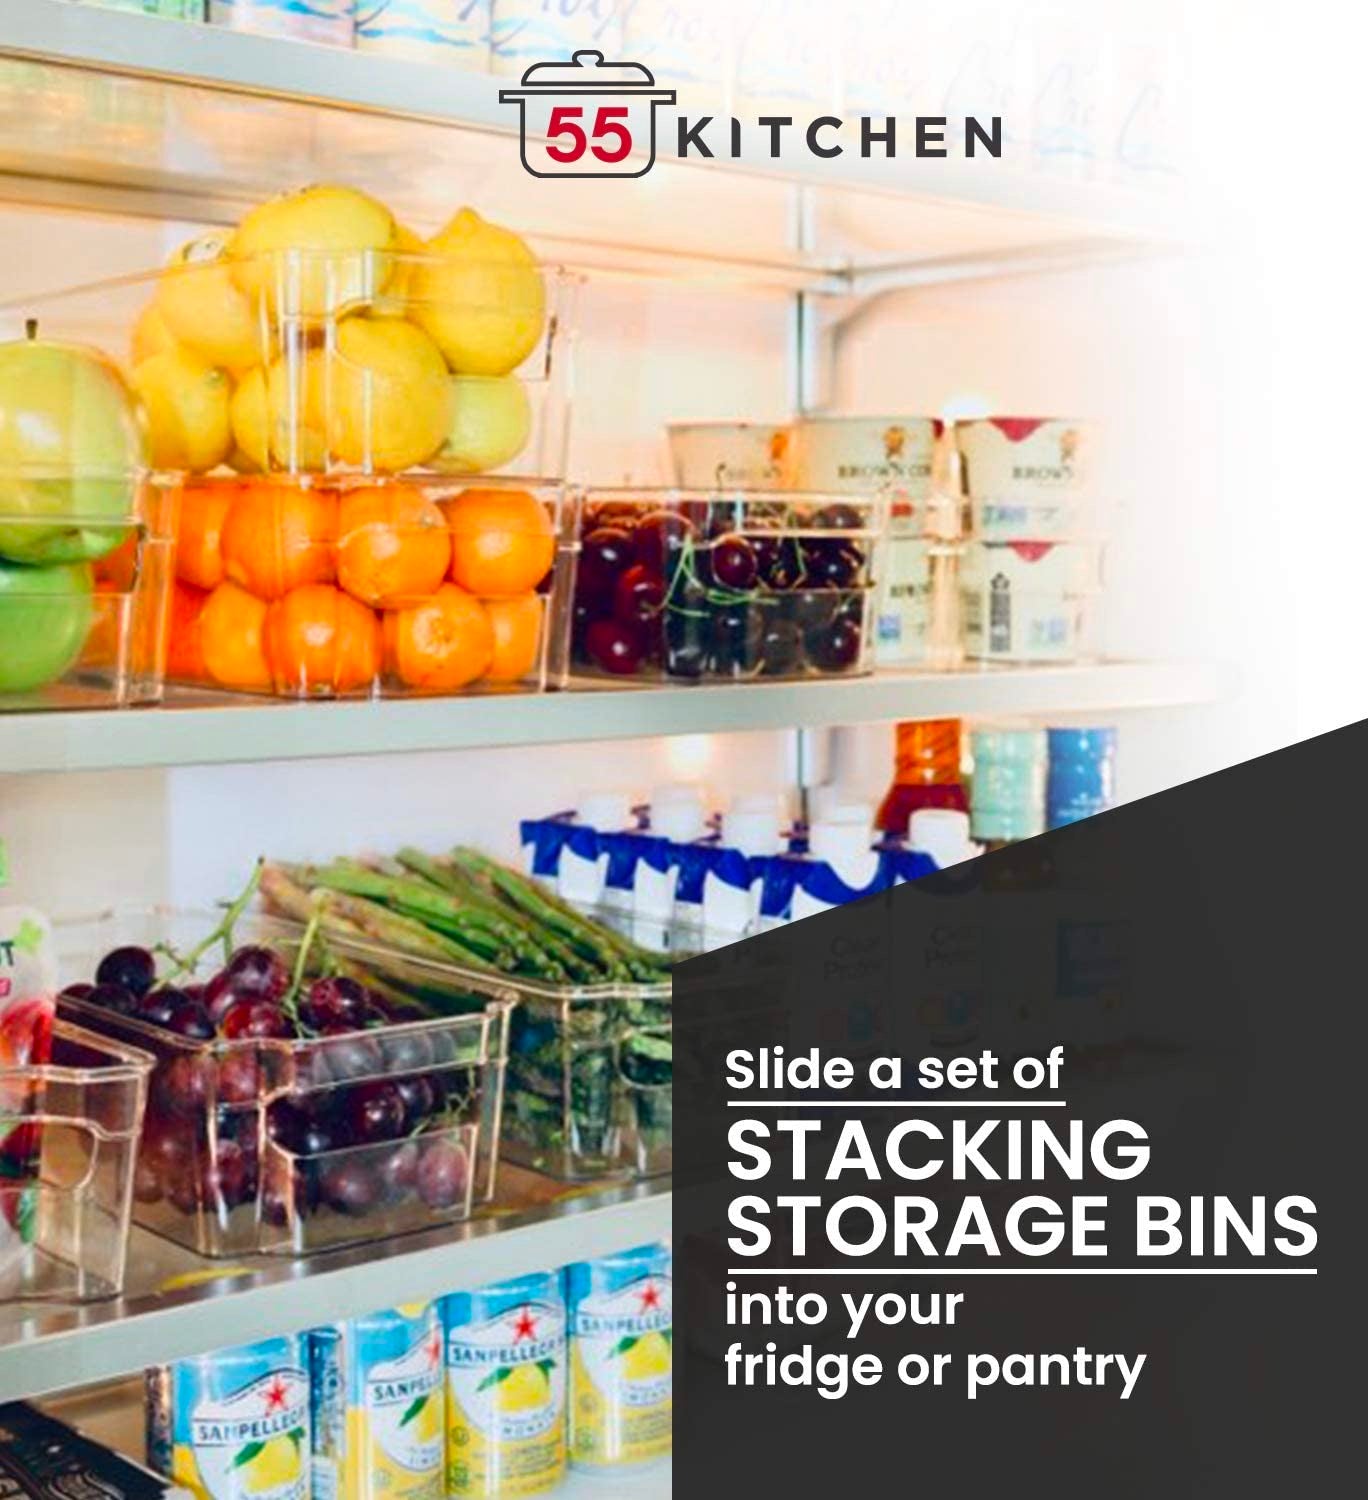 stackable fridge bins pictured in large refrigerator with fruits and vegetables.